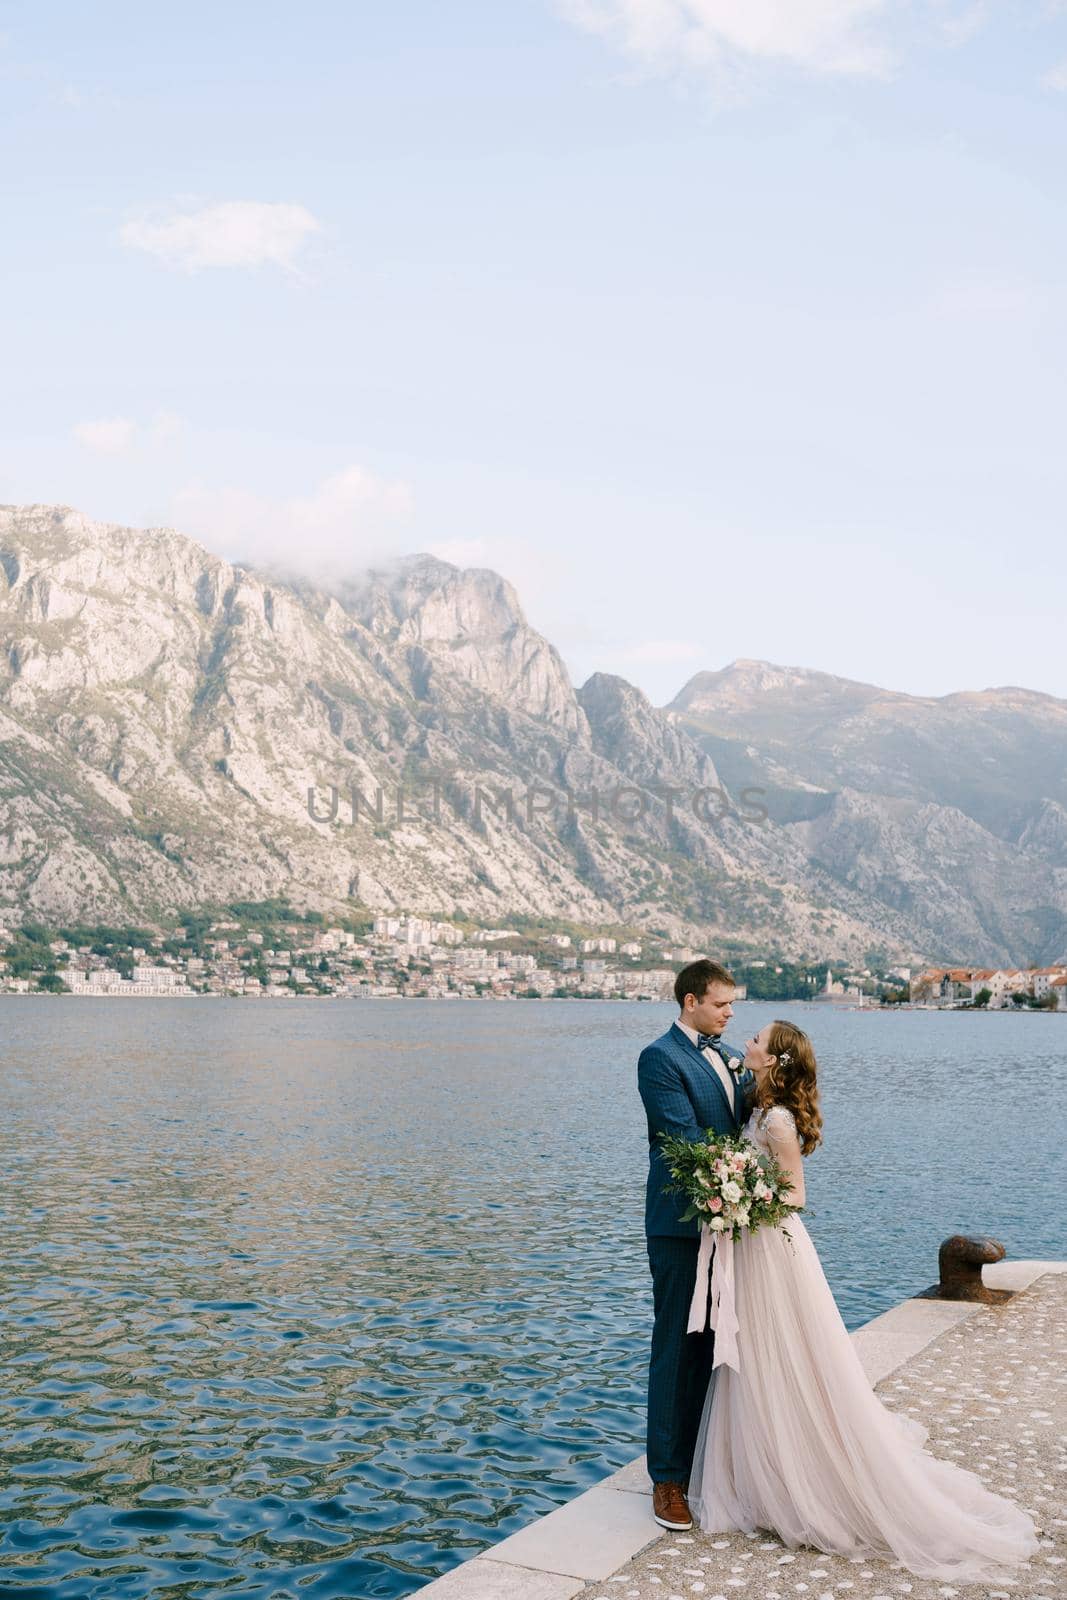 Groom hugs bride on the pier against the background of mountains. High quality photo